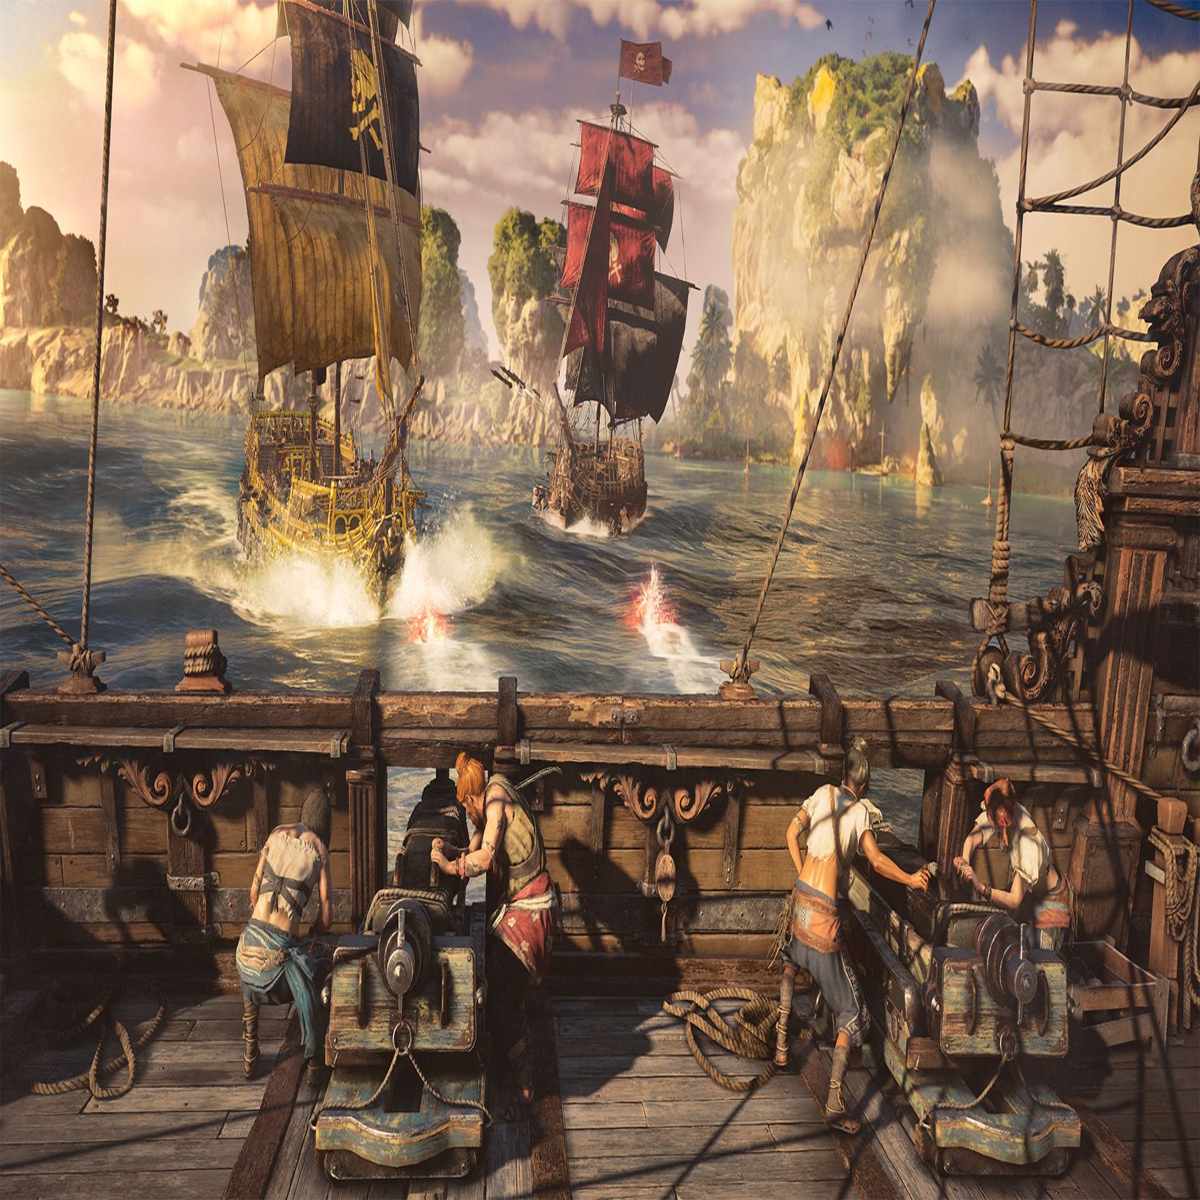 Skull and Bones: after a long wait, a release date set for winter 2024 